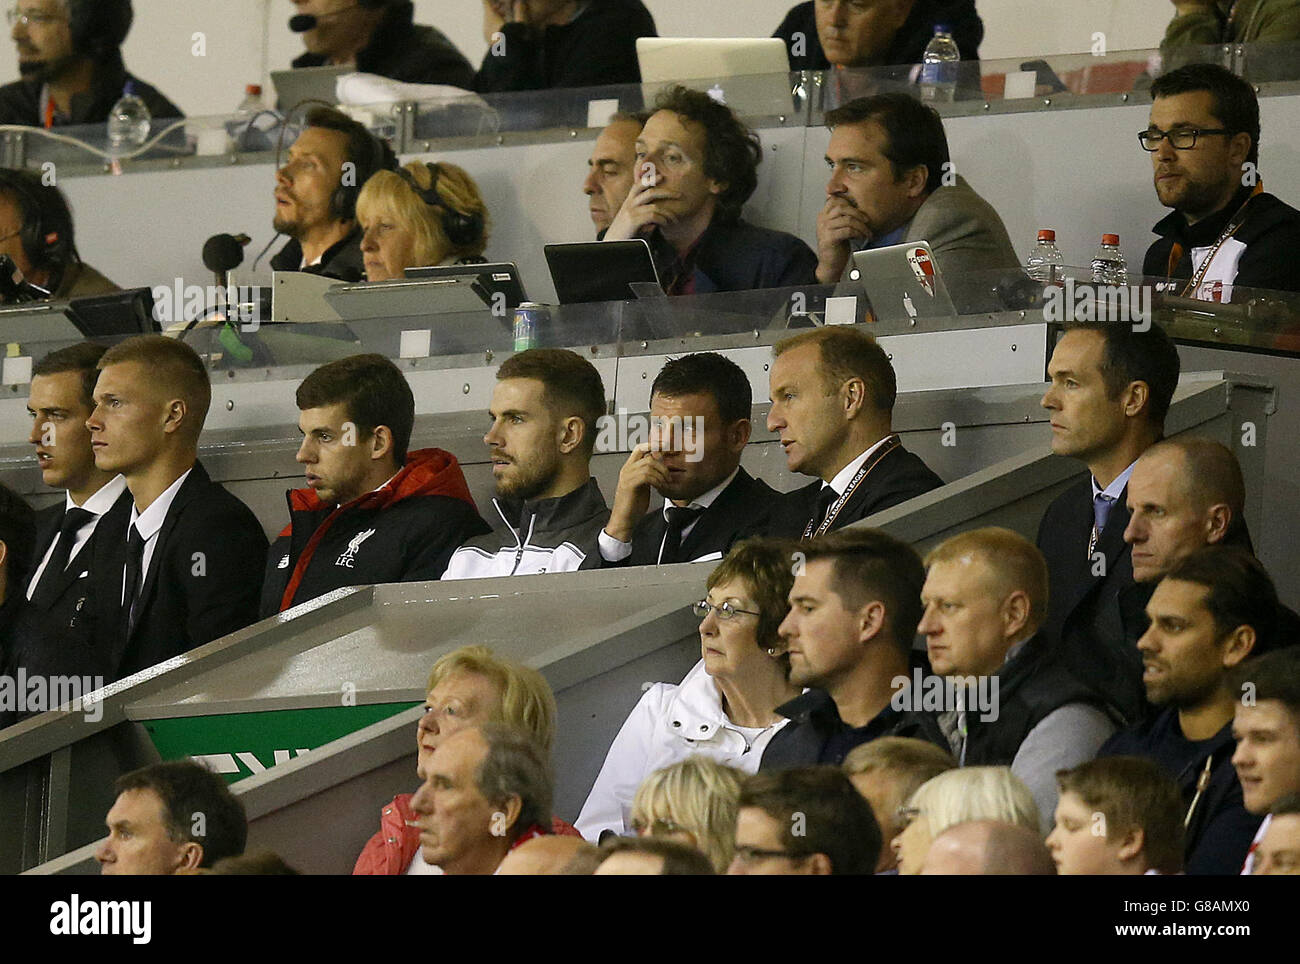 Liverpool's James Milner and Jordan Henderson in the stands during the UEFA Europa League match at Anfield, Liverpool. Stock Photo